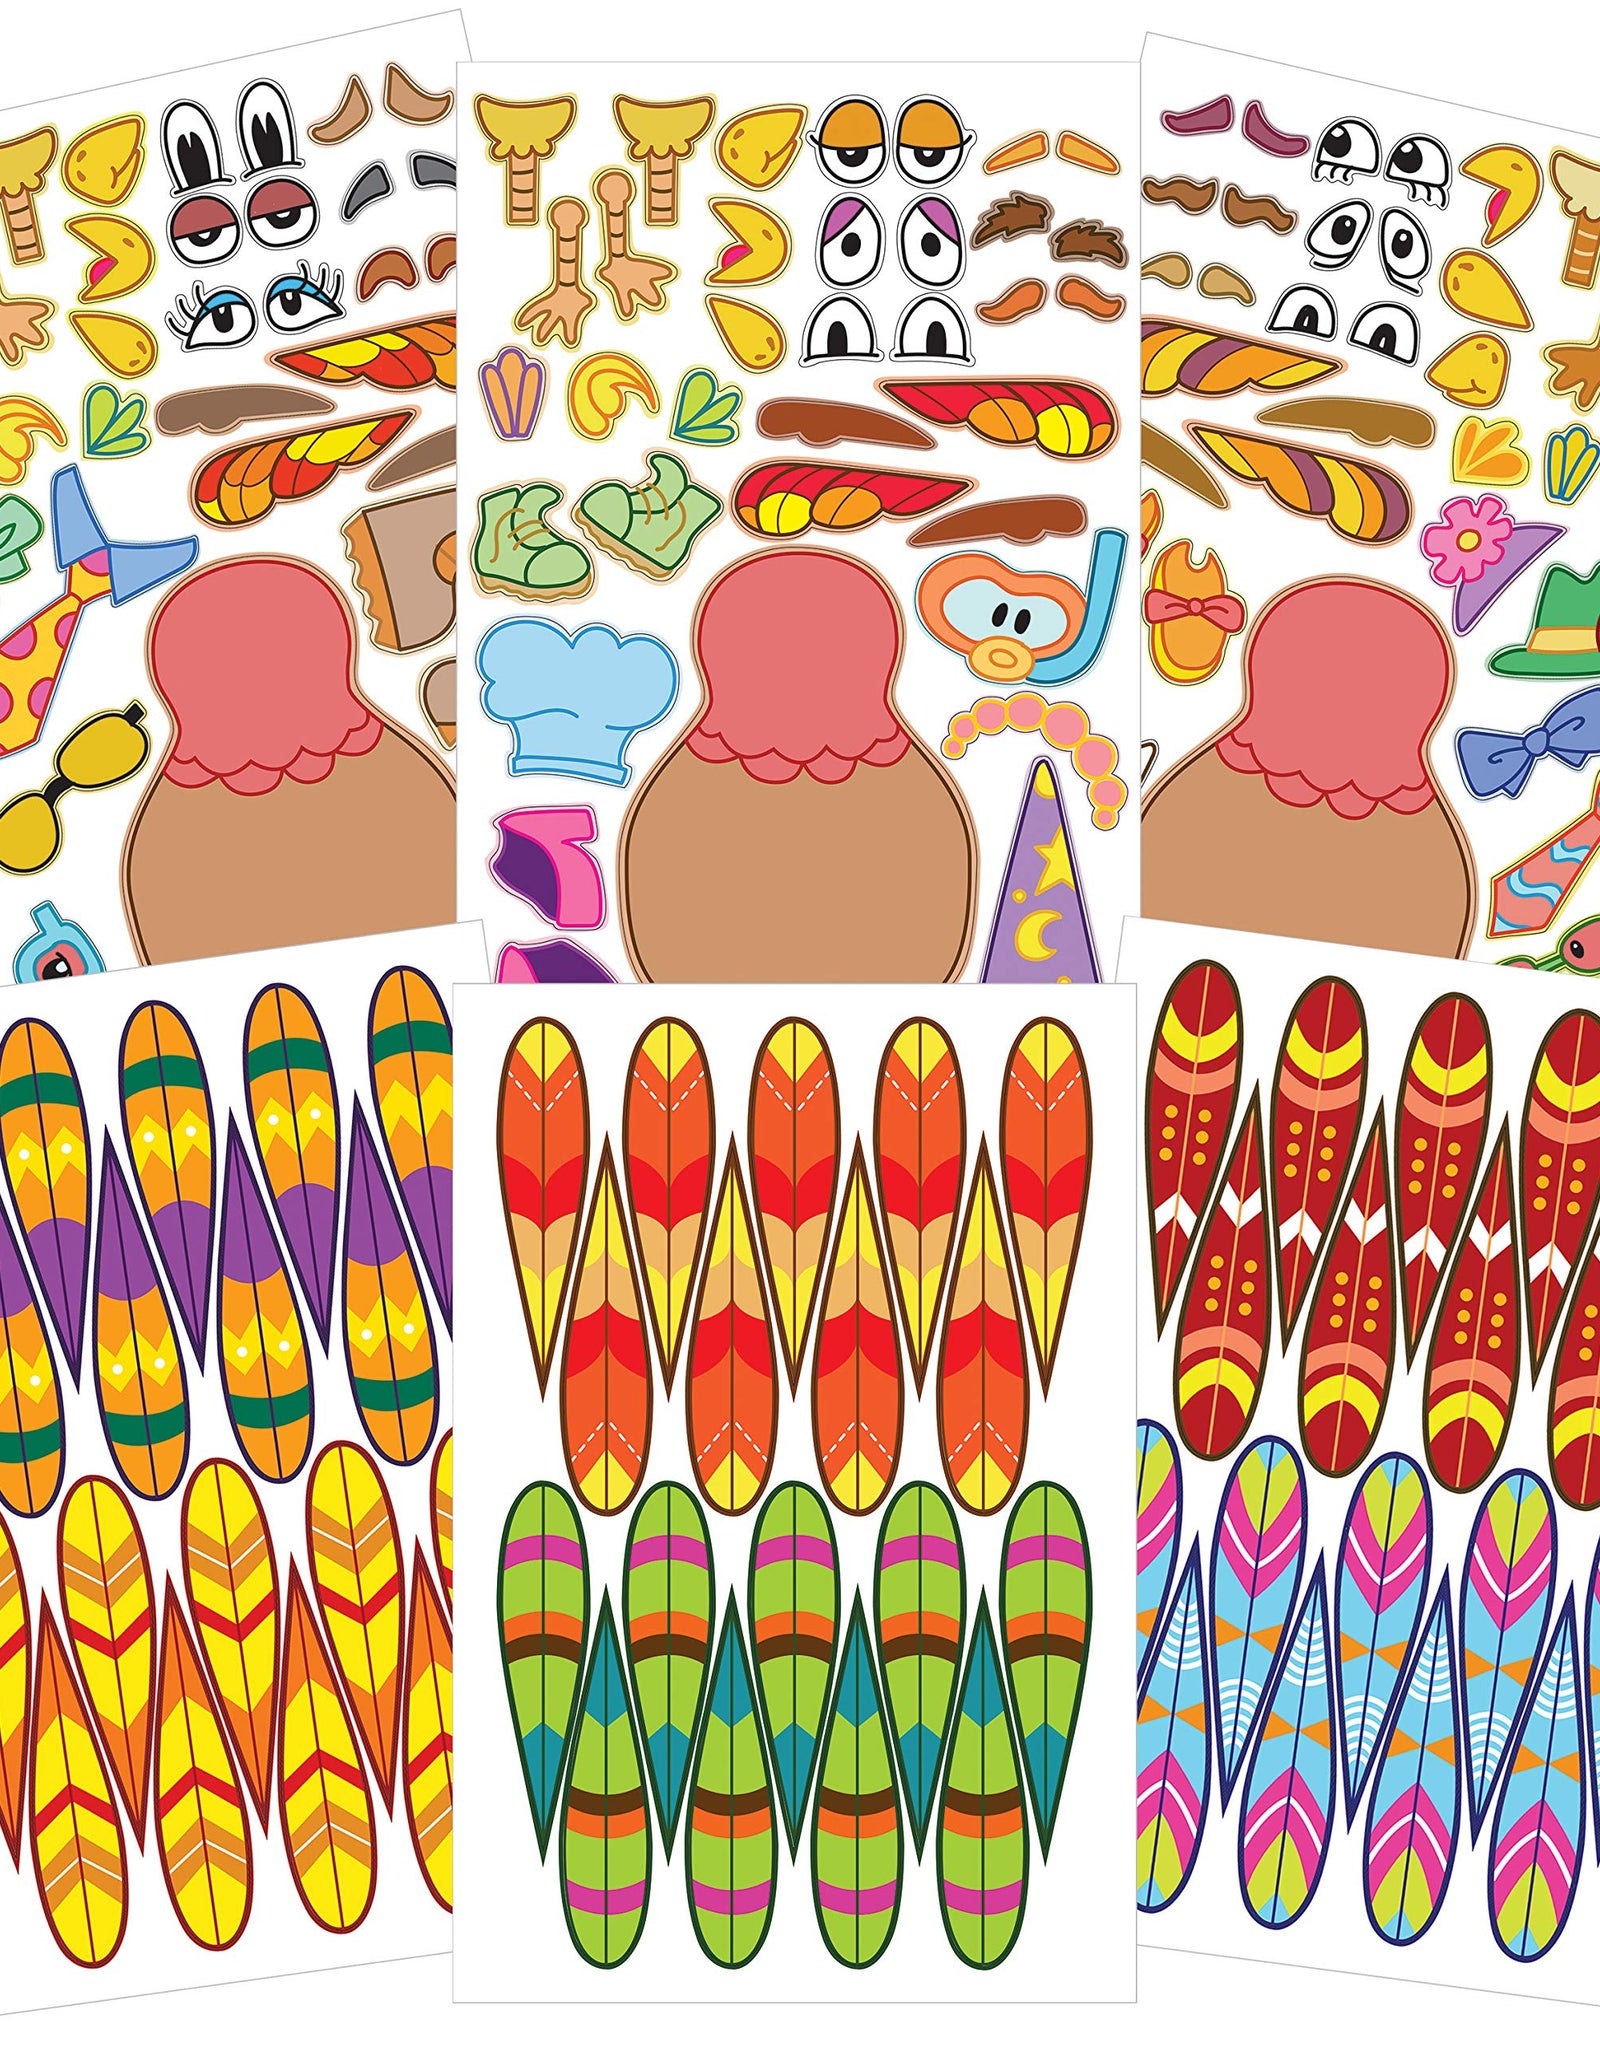 JOYIN 36 PCS Thanksgiving Make-a-Turkey Sticker Crafts for Kids DIY Turkey Stickers with Different Designs Thanksgiving Activities Party Favors